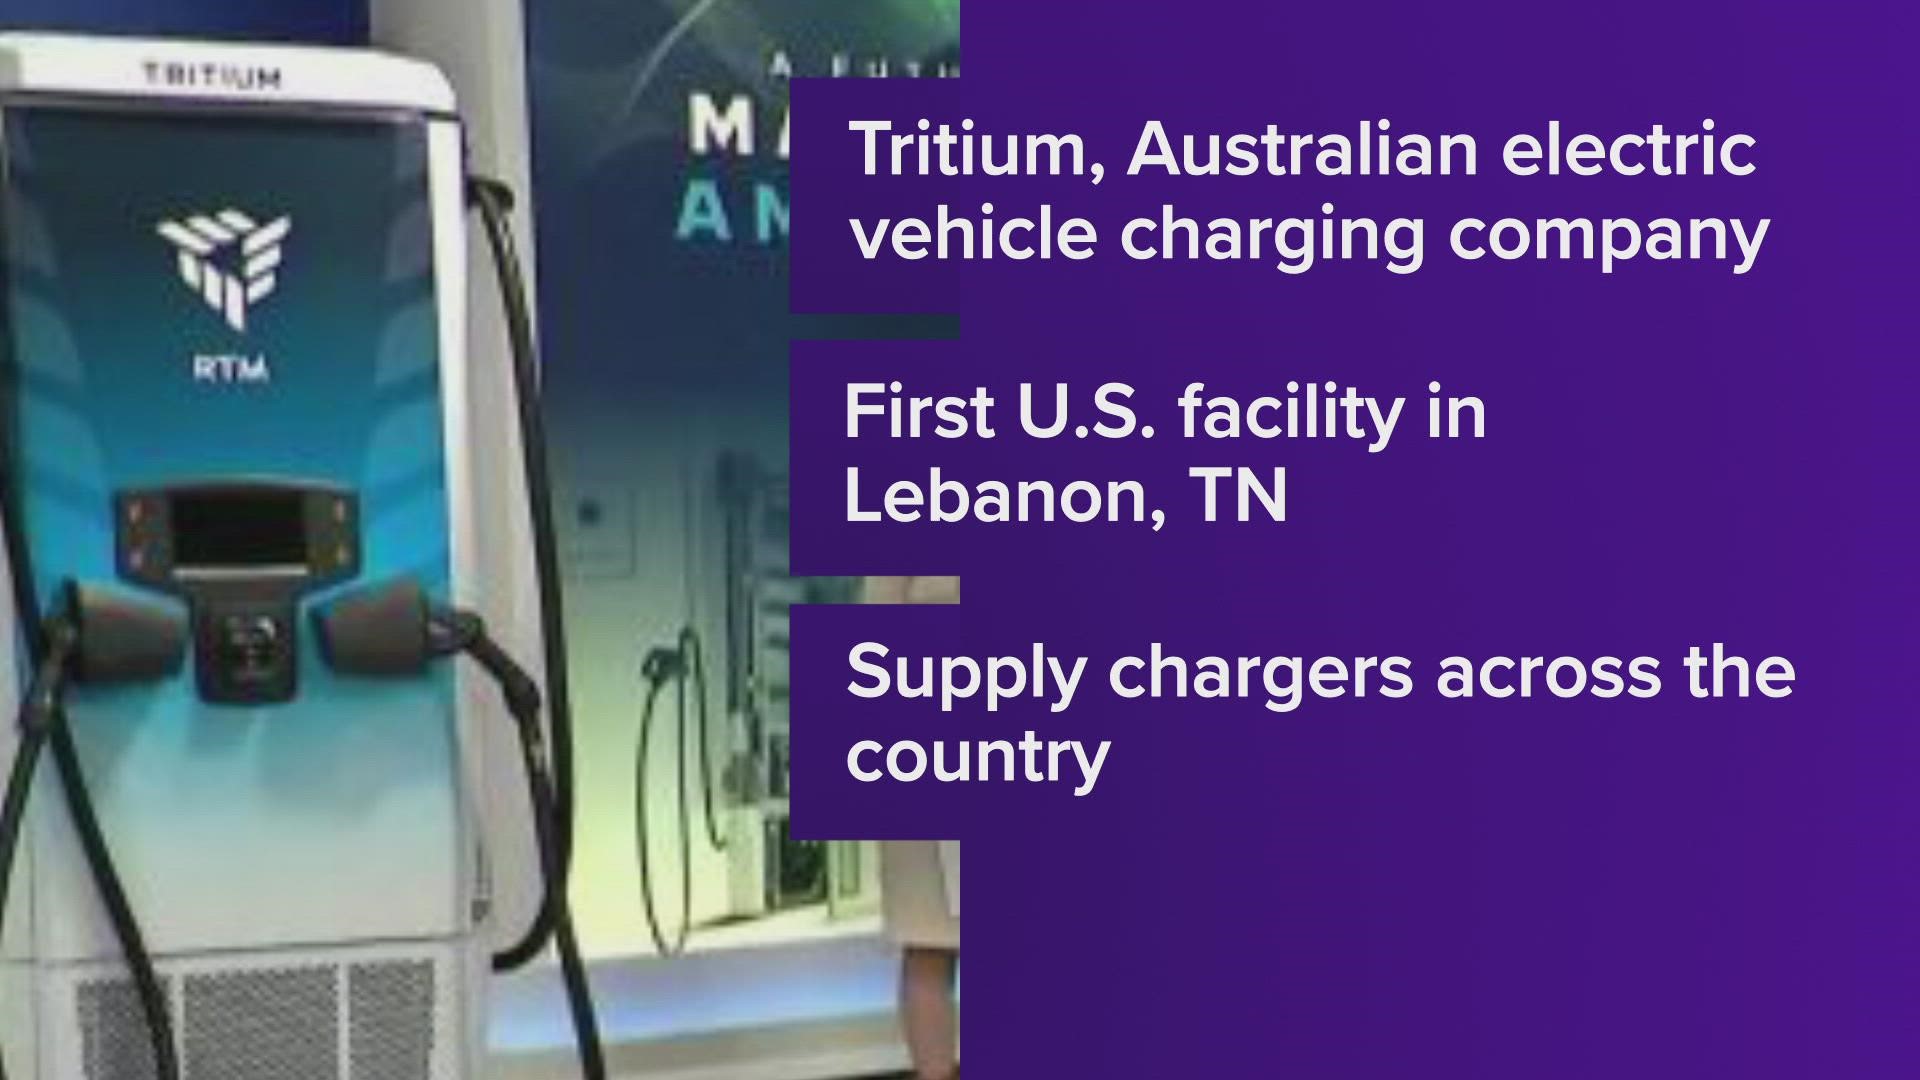 Tritium is expected to produce up to 30,000 electric vehicle chargers a year and create 500 new jobs over the next five years at the new facility.